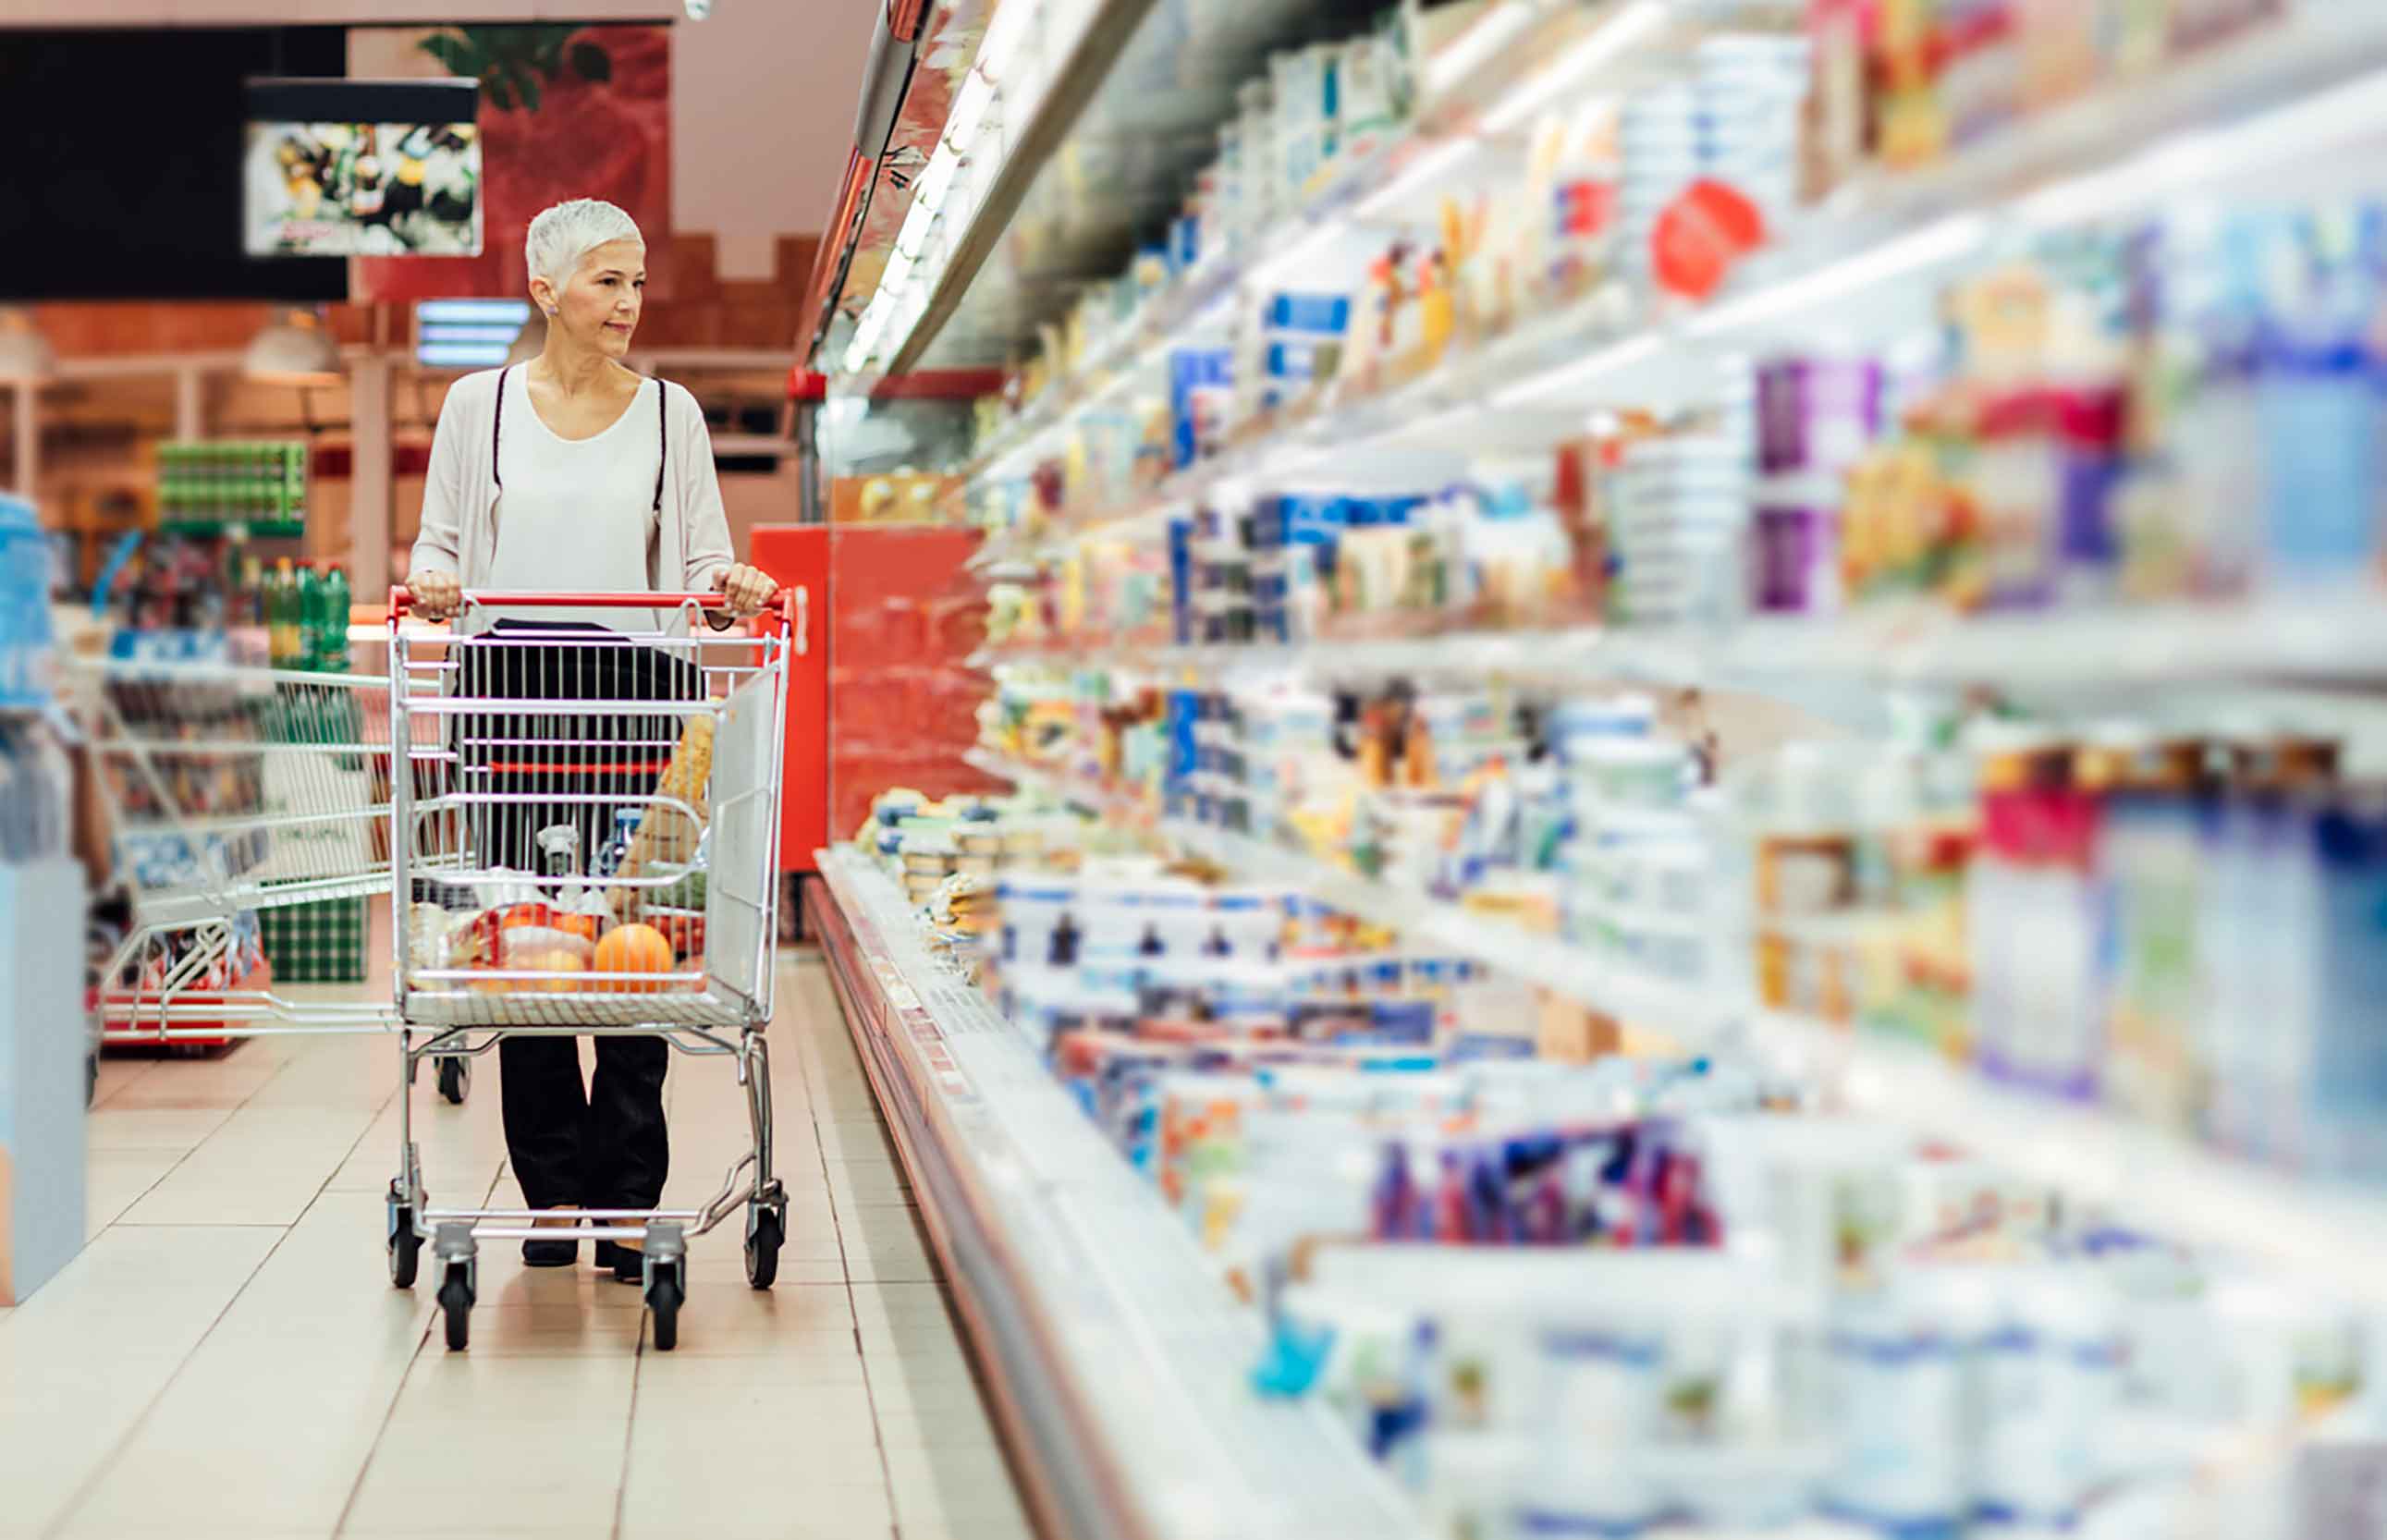 Saving money on groceries doesn't need to be difficult and it doesn't always mean cutting back.